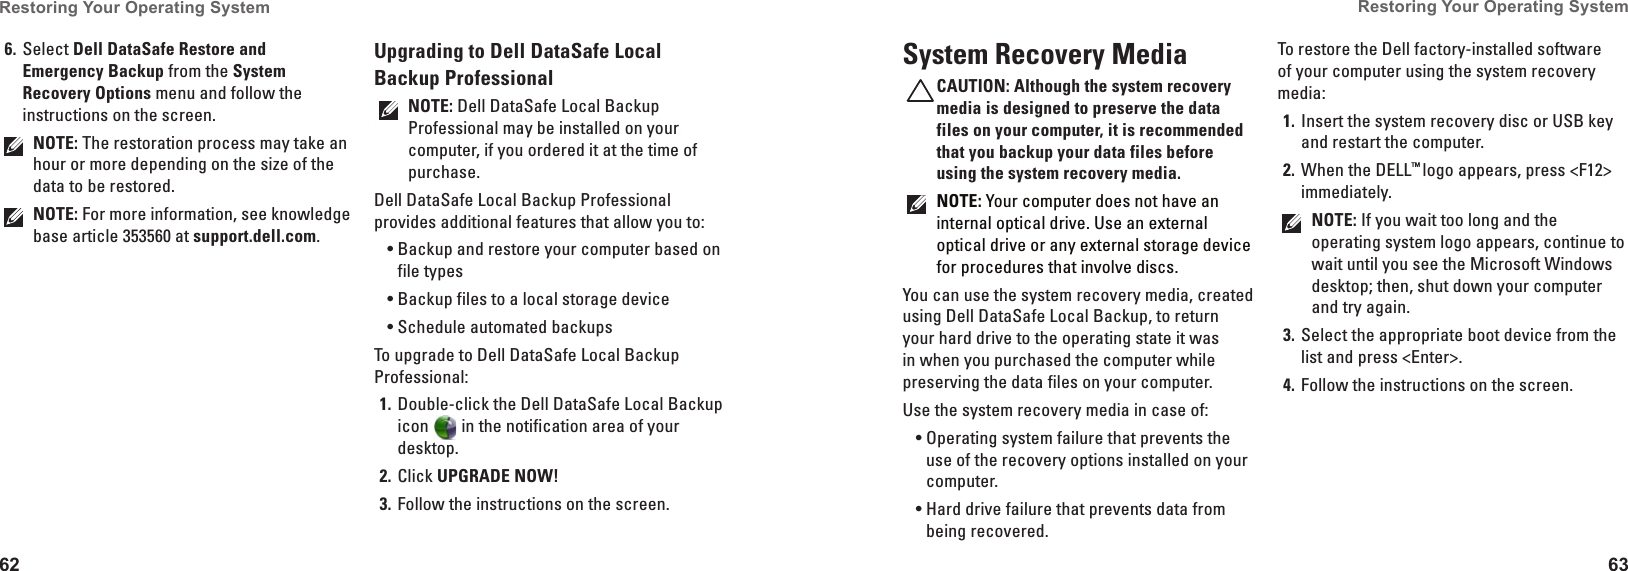 62Restoring Your Operating System  63Restoring Your Operating System  Select 6.  Dell DataSafe Restore and Emergency Backup from the System Recovery Options menu and follow the instructions on the screen.NOTE: The restoration process may take an hour or more depending on the size of the data to be restored.NOTE: For more information, see knowledge base article 353560 at support.dell.com.Upgrading to Dell DataSafe Local Backup ProfessionalNOTE: Dell DataSafe Local Backup Professional may be installed on your computer, if you ordered it at the time of purchase.Dell DataSafe Local Backup Professional provides additional features that allow you to:Backup and restore your computer based on •file typesBackup files to a local storage device•Schedule automated backups•To upgrade to Dell DataSafe Local Backup Professional:Double-click the Dell DataSafe Local Backup 1. icon   in the notification area of your desktop.Click 2.  UPGRADE NOW!Follow the instructions on the screen.3. System Recovery MediaCAUTION: Although the system recovery media is designed to preserve the data files on your computer, it is recommended that you backup your data files before using the system recovery media.NOTE: Your computer does not have an internal optical drive. Use an external optical drive or any external storage device for procedures that involve discs.You can use the system recovery media, created using Dell DataSafe Local Backup, to return your hard drive to the operating state it was in when you purchased the computer while preserving the data files on your computer.Use the system recovery media in case of:Operating system failure that prevents the •use of the recovery options installed on your computer.Hard drive failure that prevents data from •being recovered.To restore the Dell factory-installed software of your computer using the system recovery media:Insert the system recovery disc or USB key 1. and restart the computer.When the DELL2.  ™ logo appears, press &lt;F12&gt; immediately.NOTE: If you wait too long and the operating system logo appears, continue to wait until you see the Microsoft Windows desktop; then, shut down your computer and try again.Select the appropriate boot device from the 3. list and press &lt;Enter&gt;.Follow the instructions on the screen.4. 